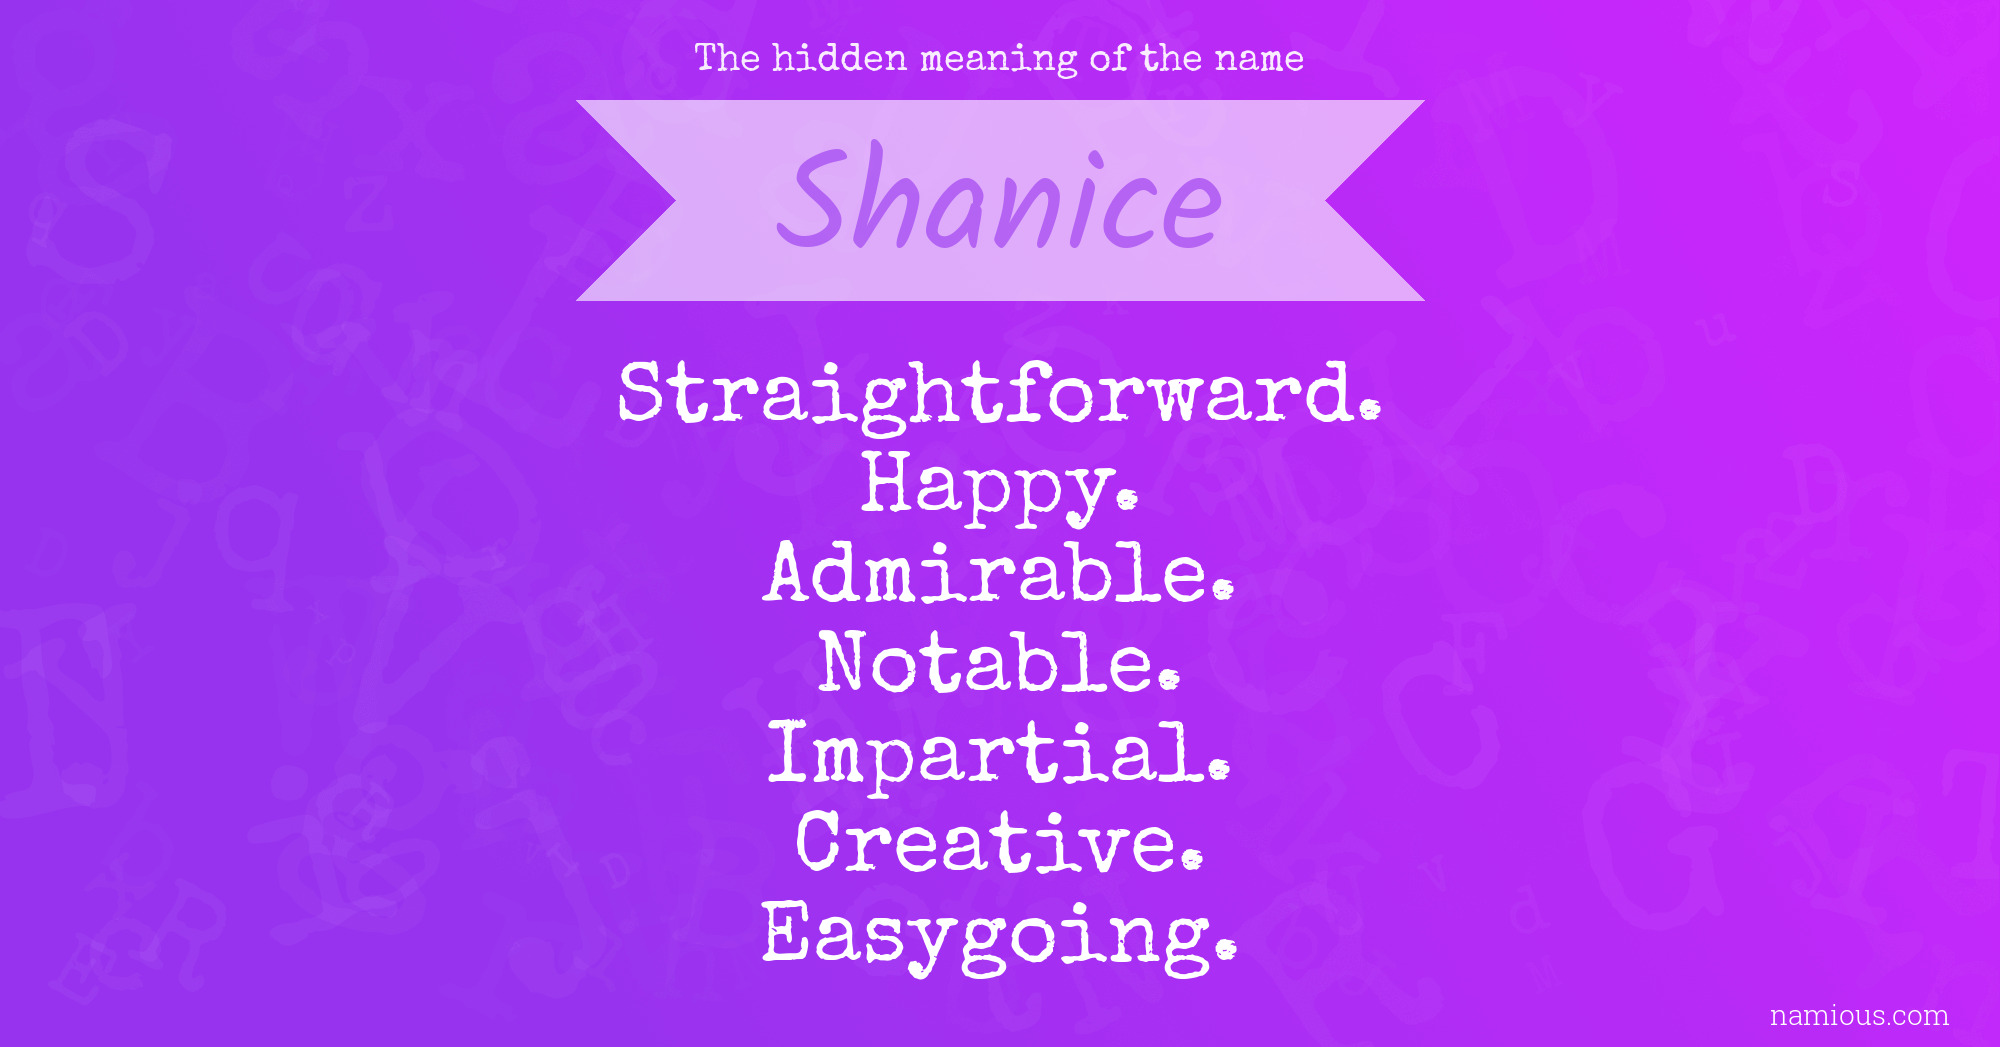 The hidden meaning of the name Shanice